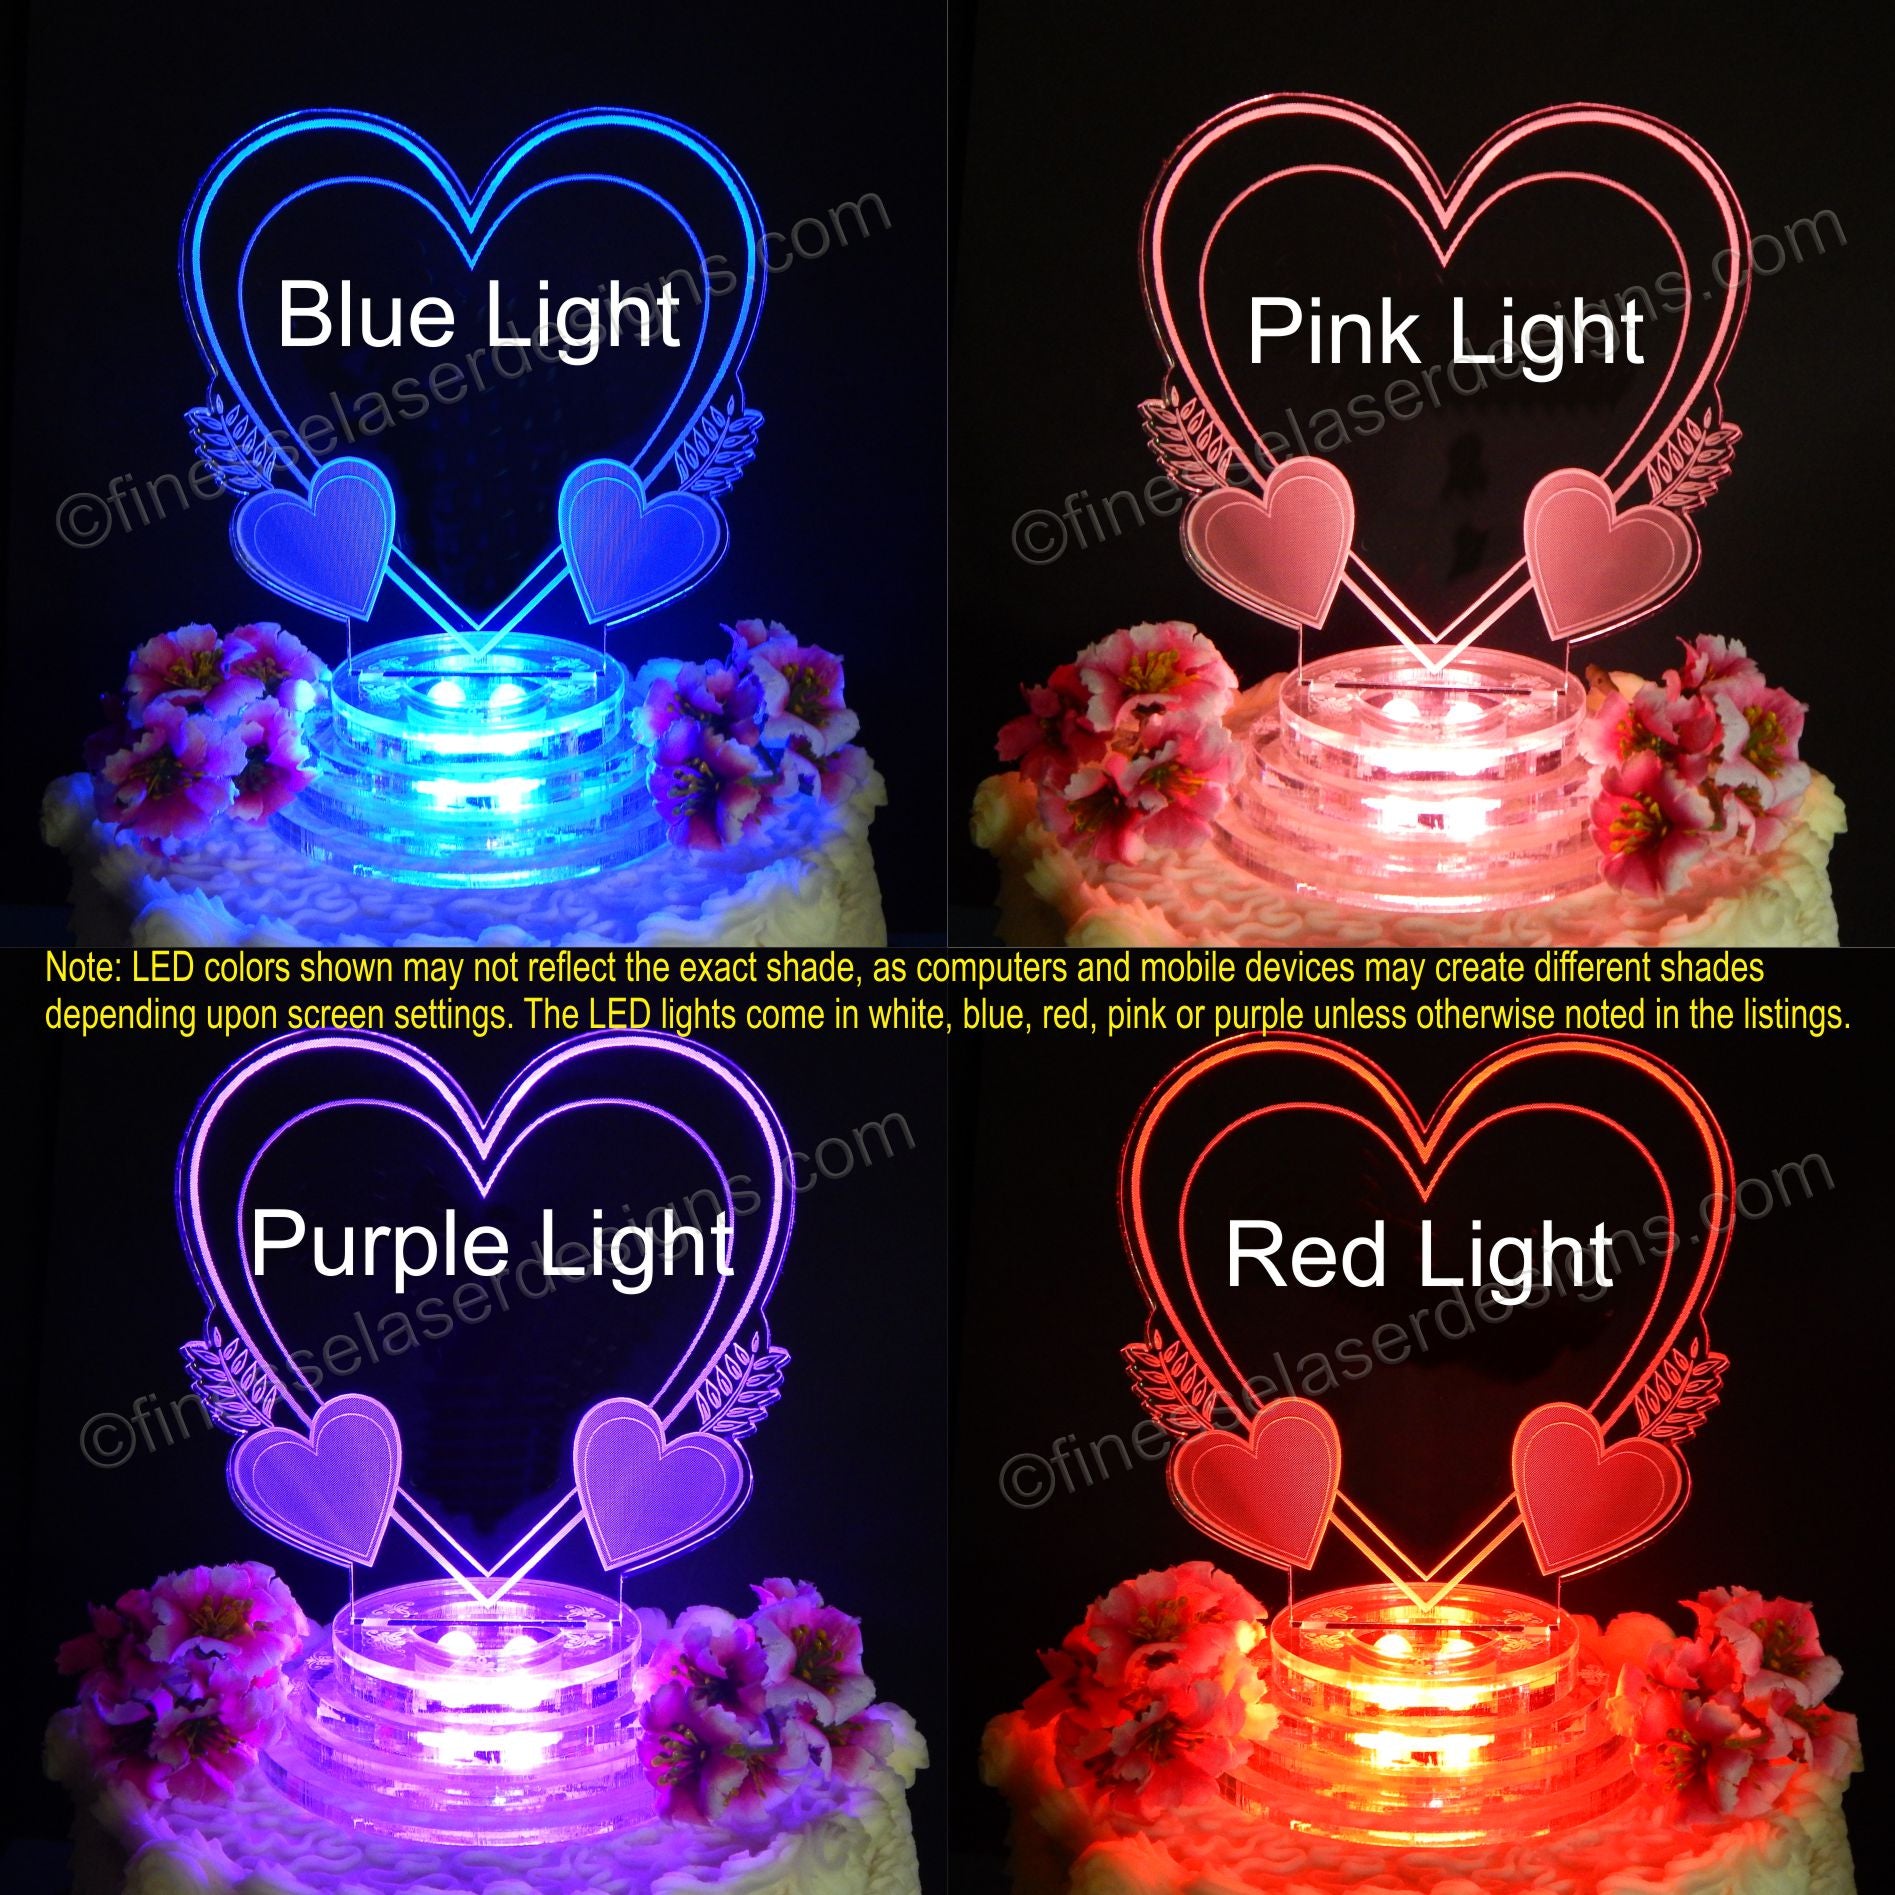 Colored lighted views of a heart shaped acrylic cake topper shown with monogram and date, lit up and sitting on top of a cake decorated with flowers, shown in blue, pink, purple and red lighting